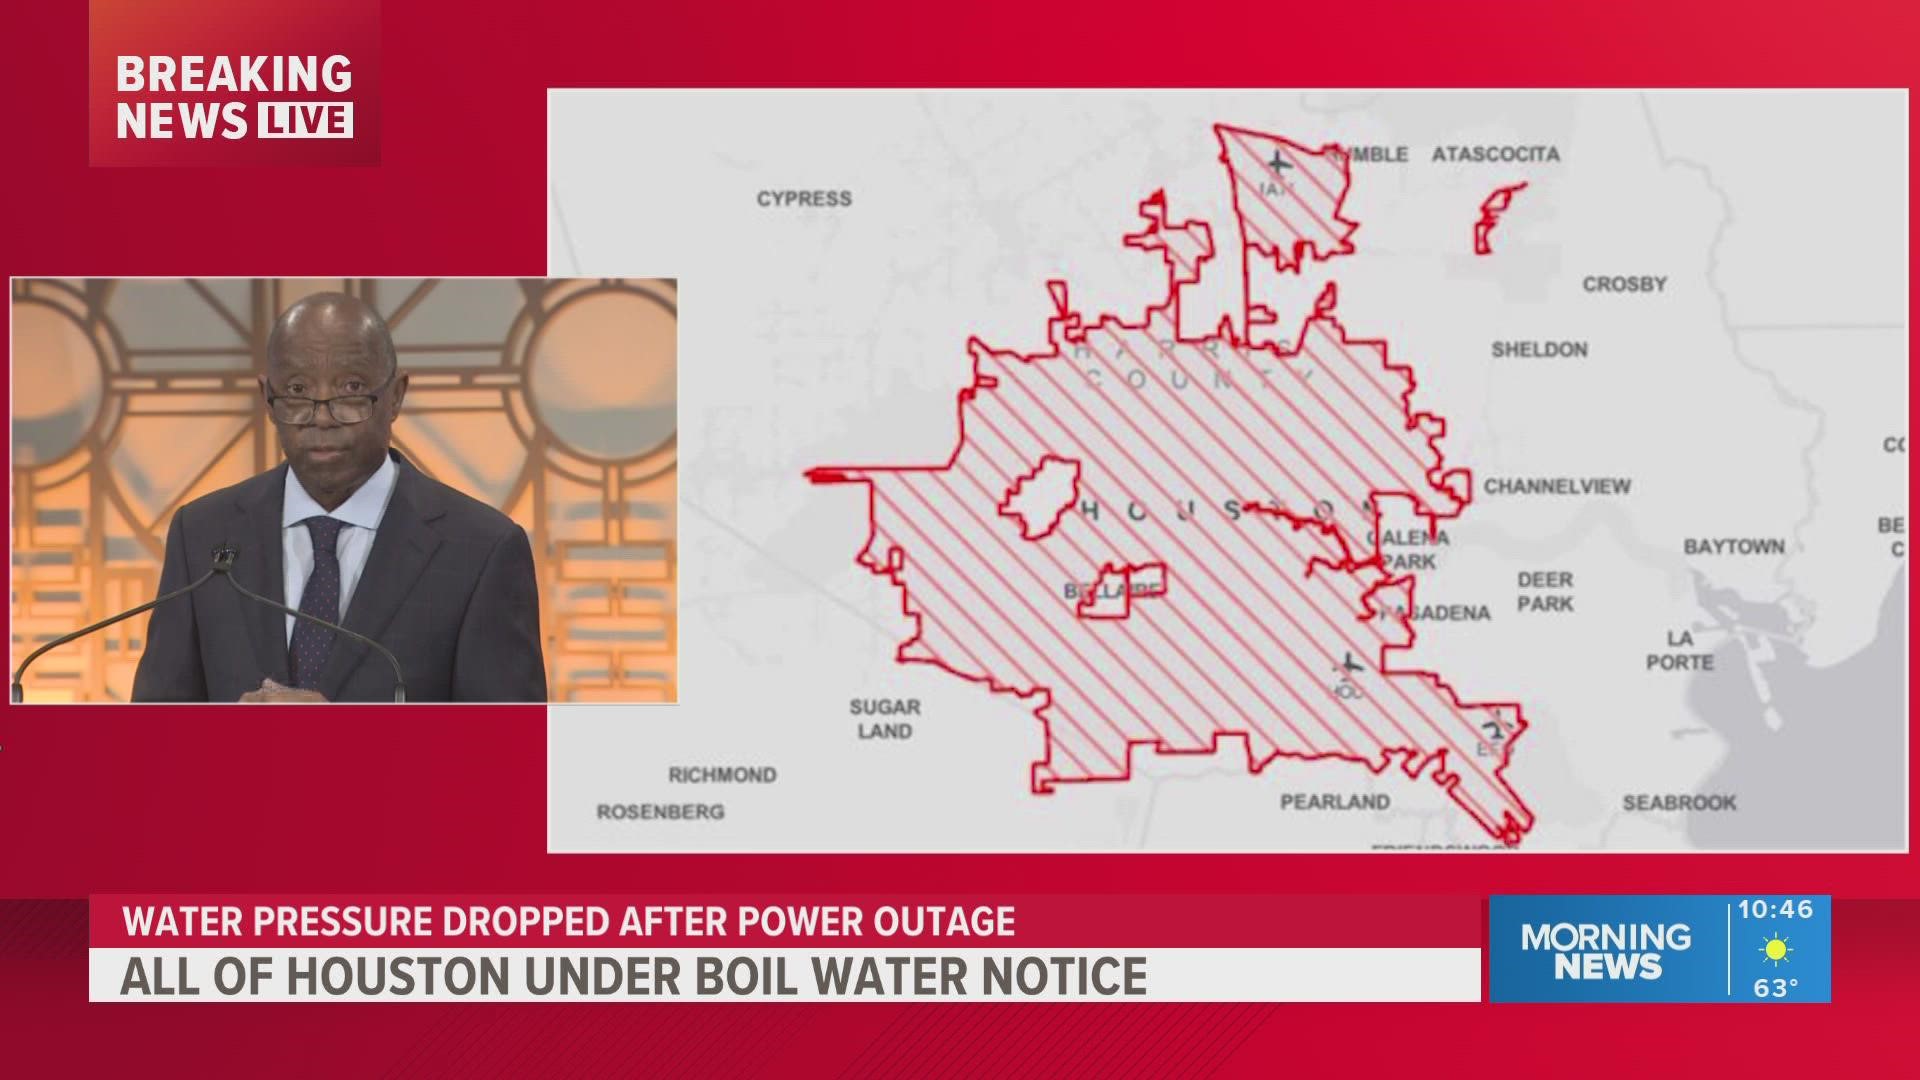 The boil water notice was issued for all of Houston.